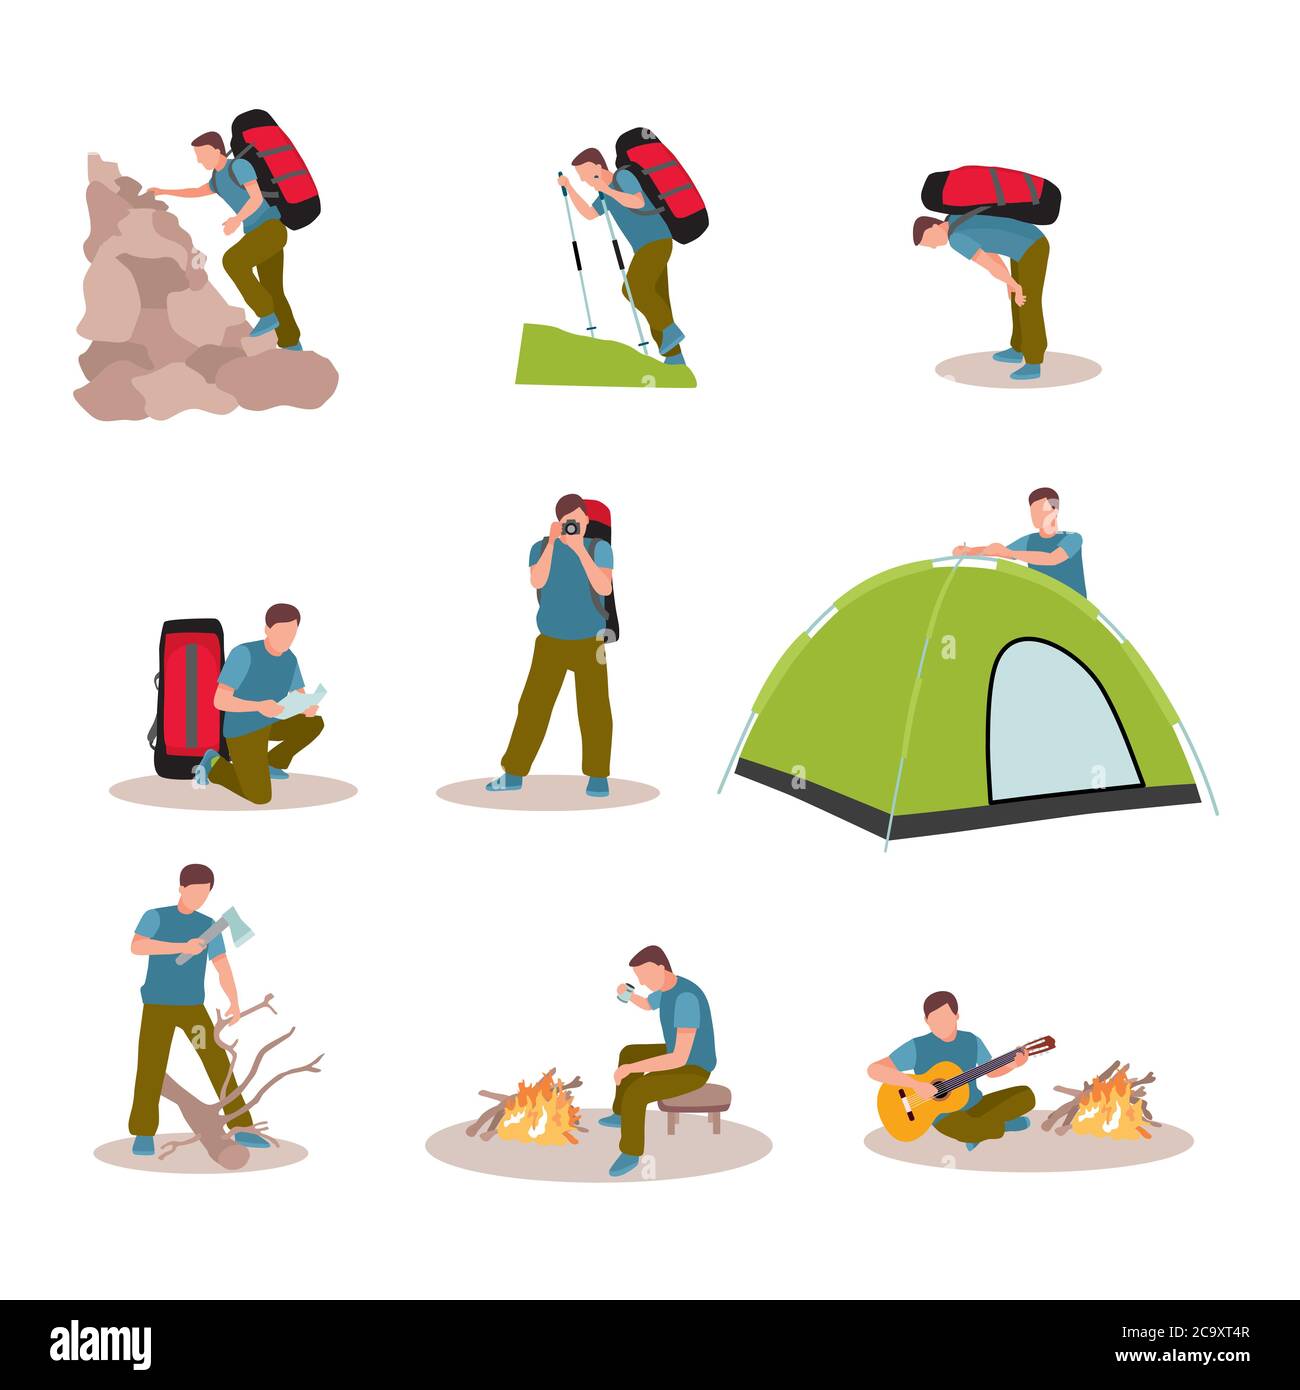 Hiking vacation vector characters set isolated on white background Stock Vector